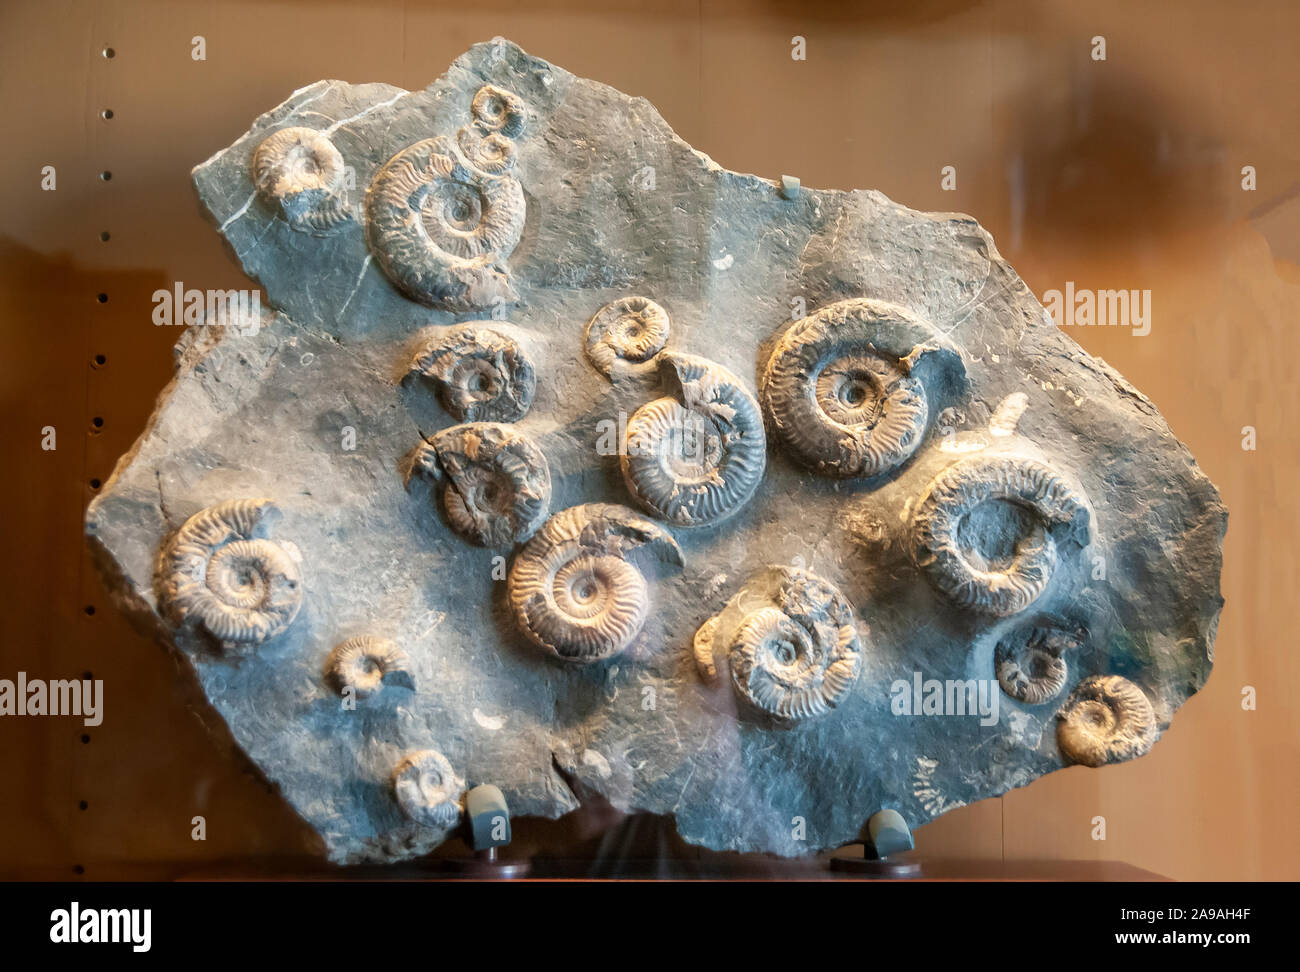 Grammoceras doertenense (Ammonit) fossil. Ammonites are extinct marine invertebrates. They first appeared in the Late Silurian to Early Devonian perio Stock Photo